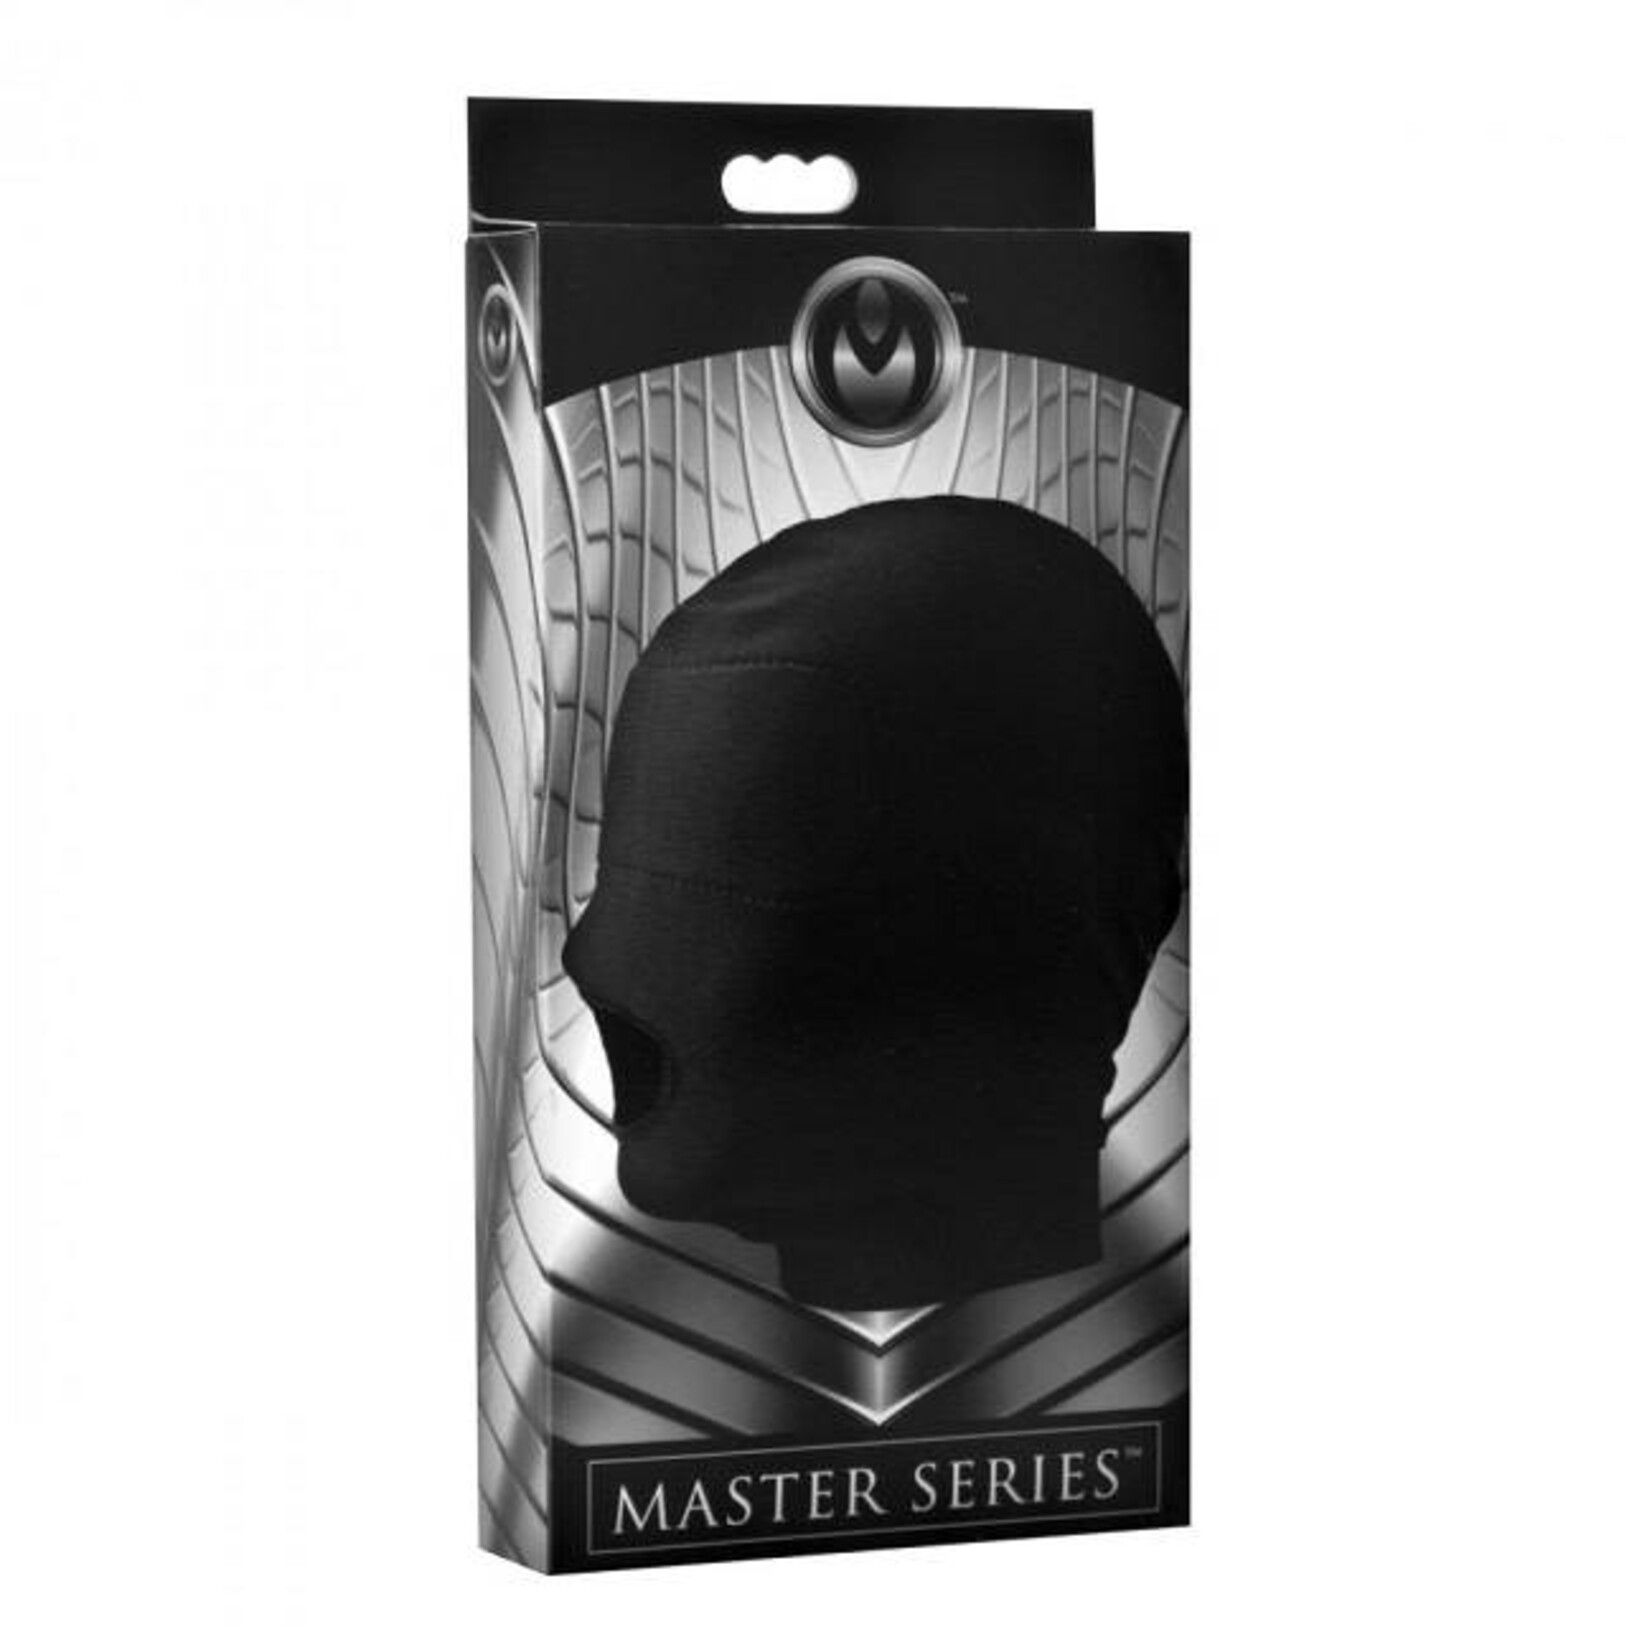 Master Series Master Series Disguise Open Mouth Hood with Padded Blindfold